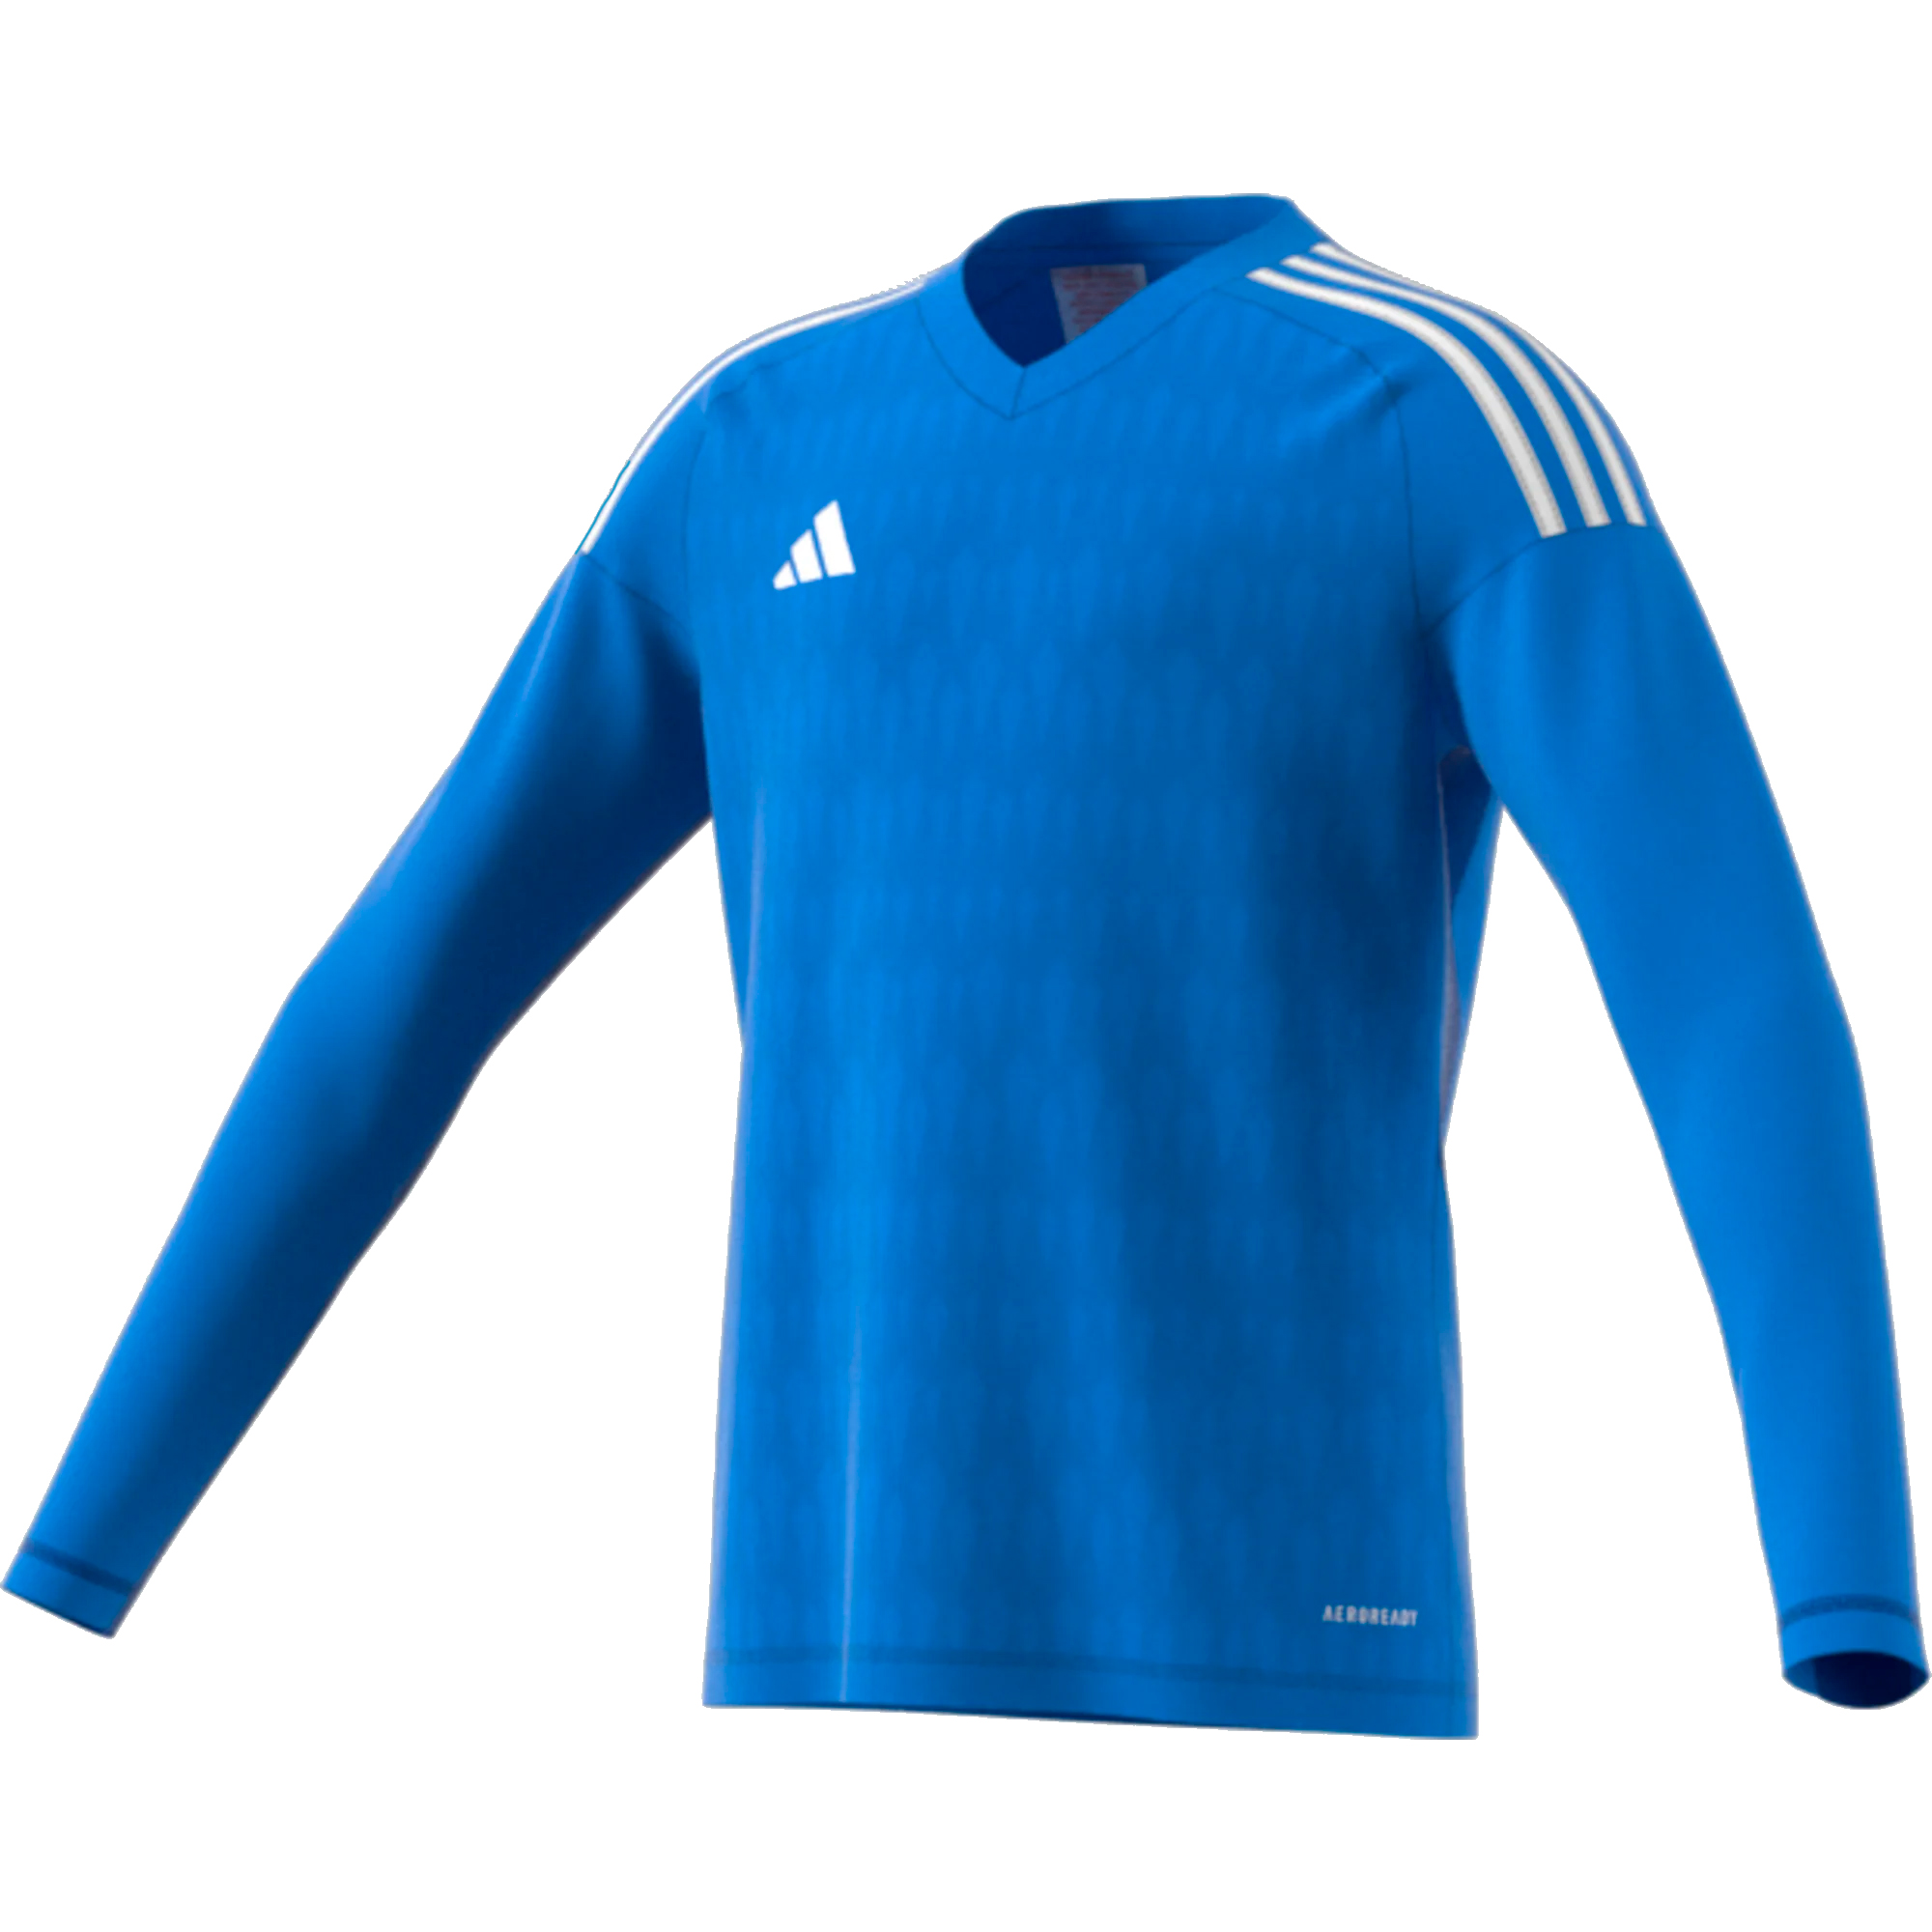 ADIDAS T23 COMPETITION GK JERSEY LS YOUTH BLUE RUSH